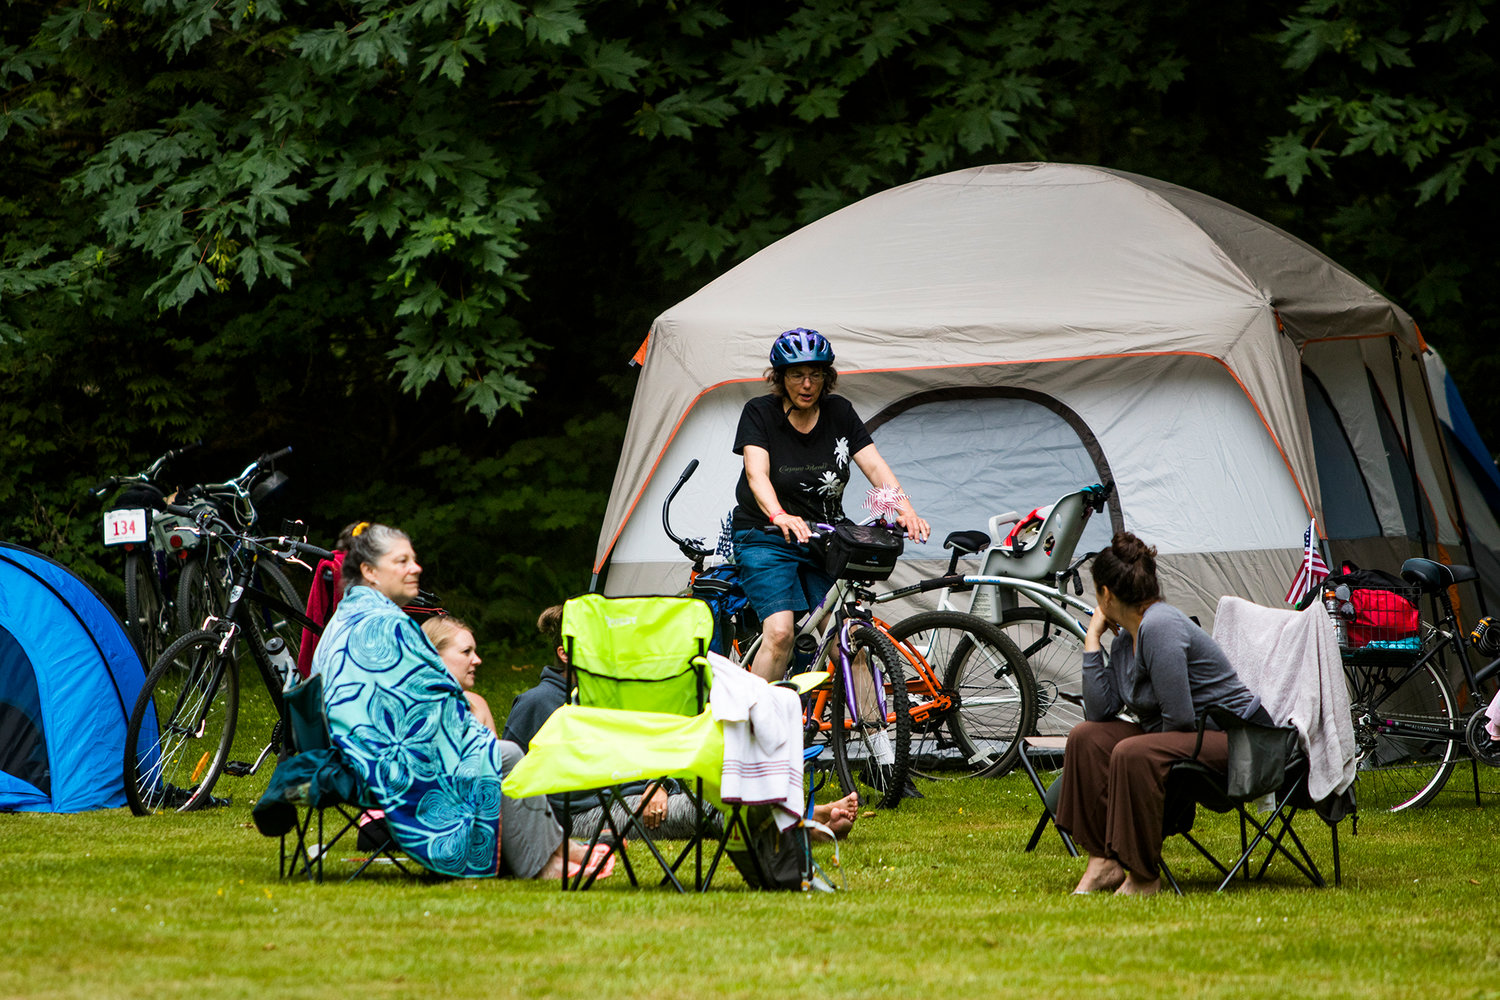 FILE PHOTO — Mary Huntting, of Tumwater, rides her bike into her campsite at Rainbow Falls State Park after the annual Ride The Willapa event.